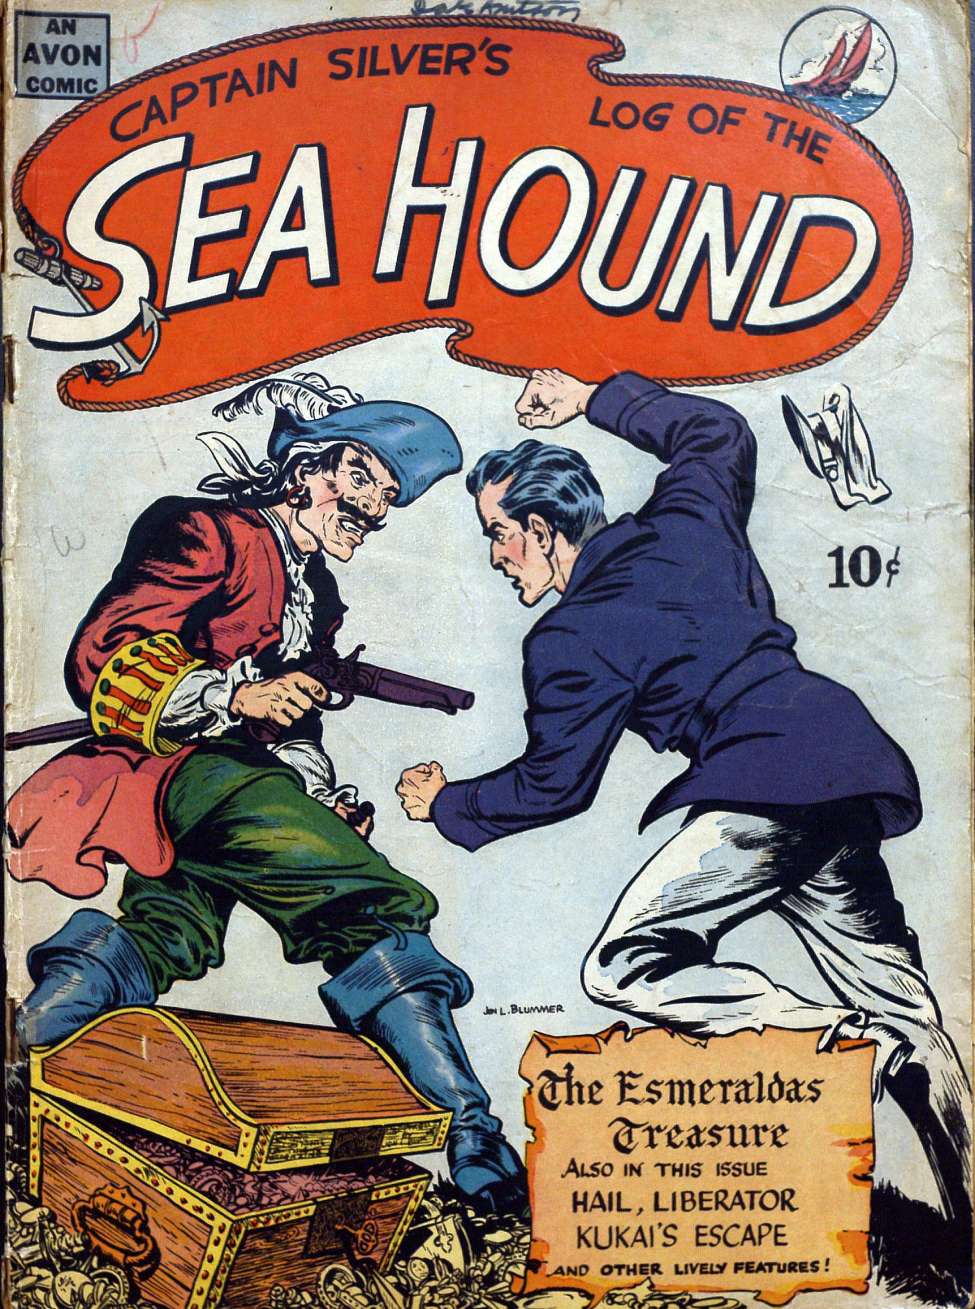 Comic Book Cover For Captain Silver's Log of the Sea Hound (nn) - Version 2